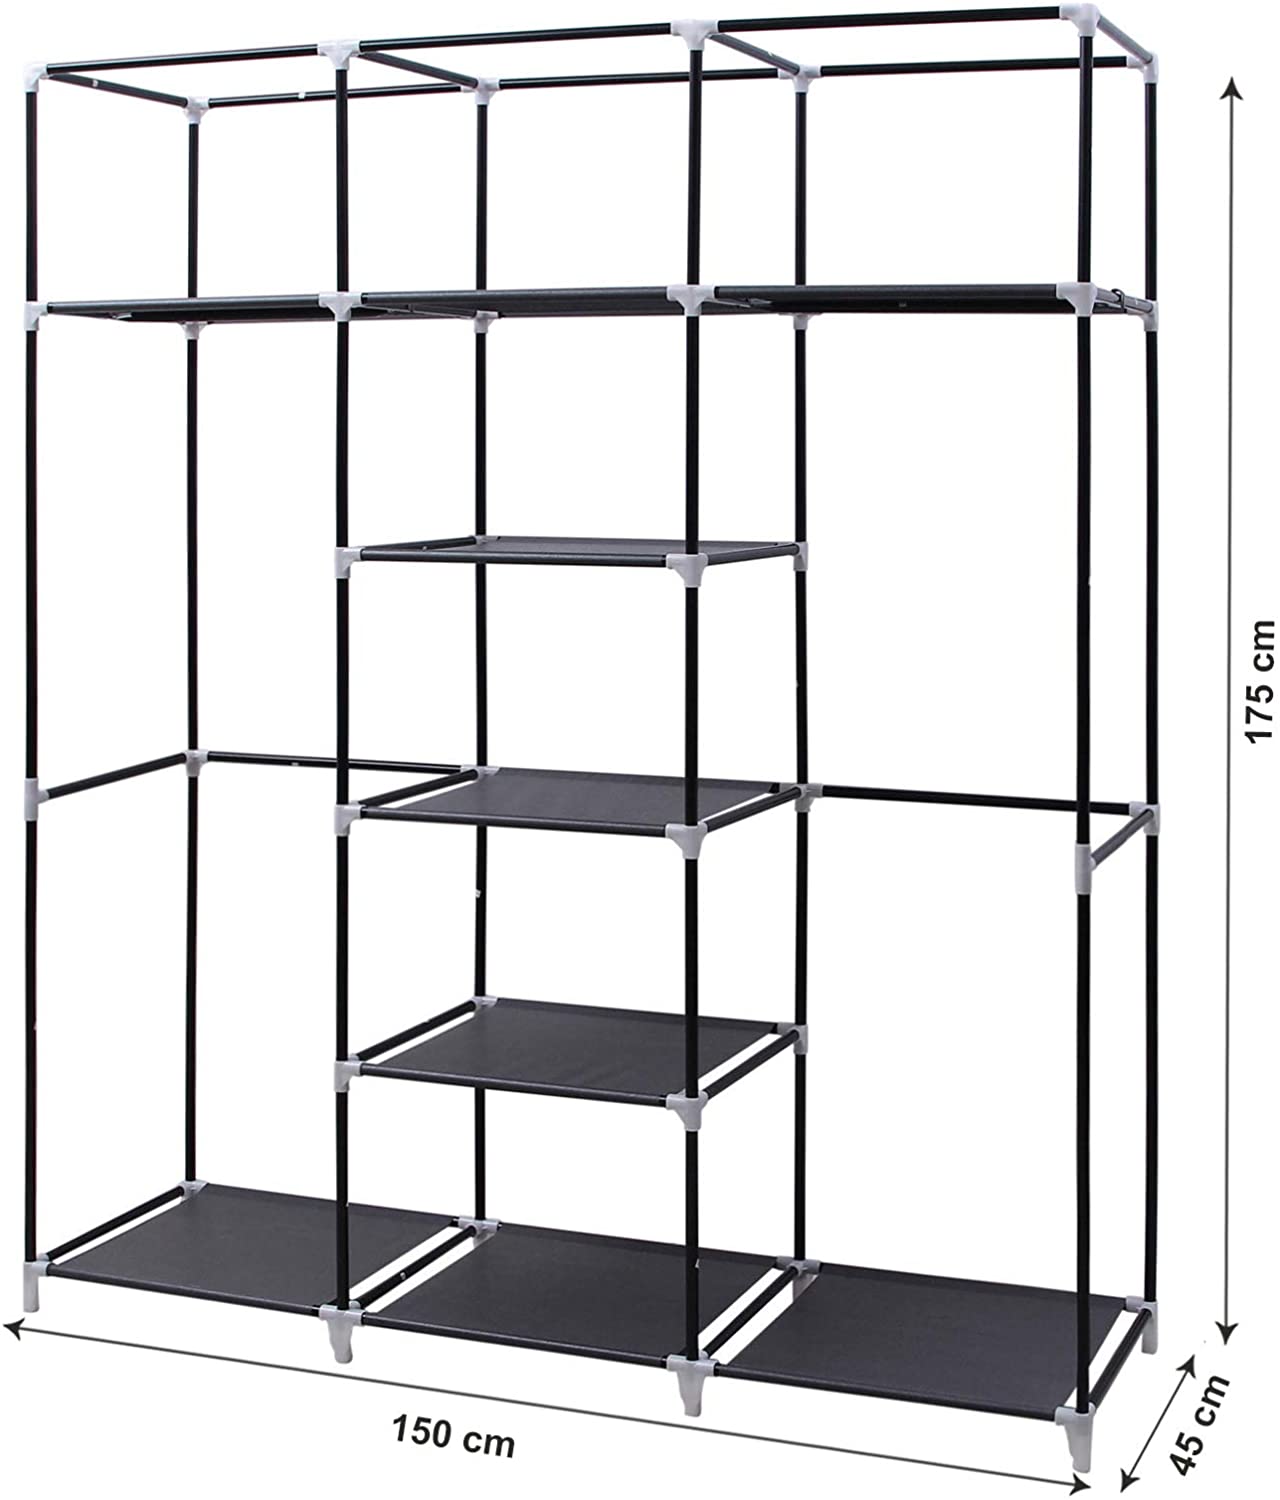 Hot Sell High-Quality Closet Wardrobe with Cover with 6 Storage Shelves